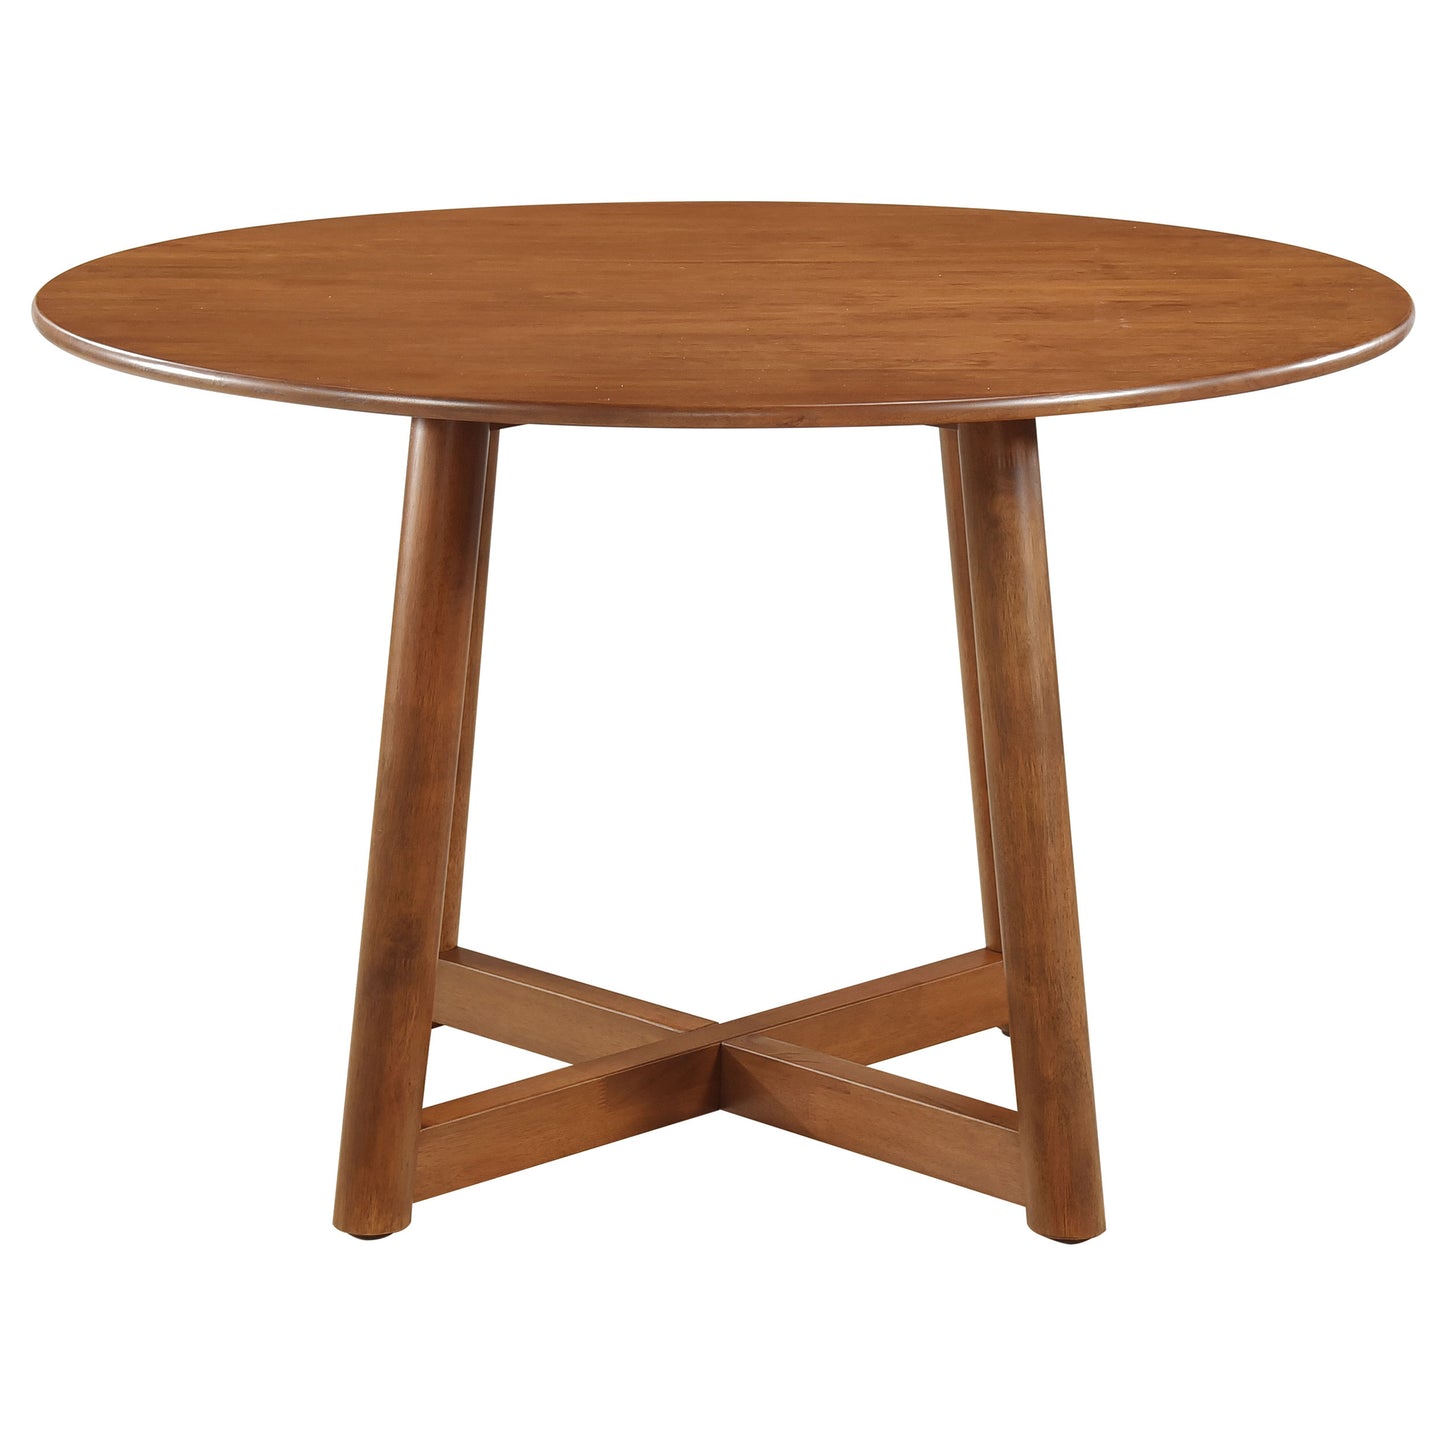 Dinah Round Solid Wood Dining Table Walnut